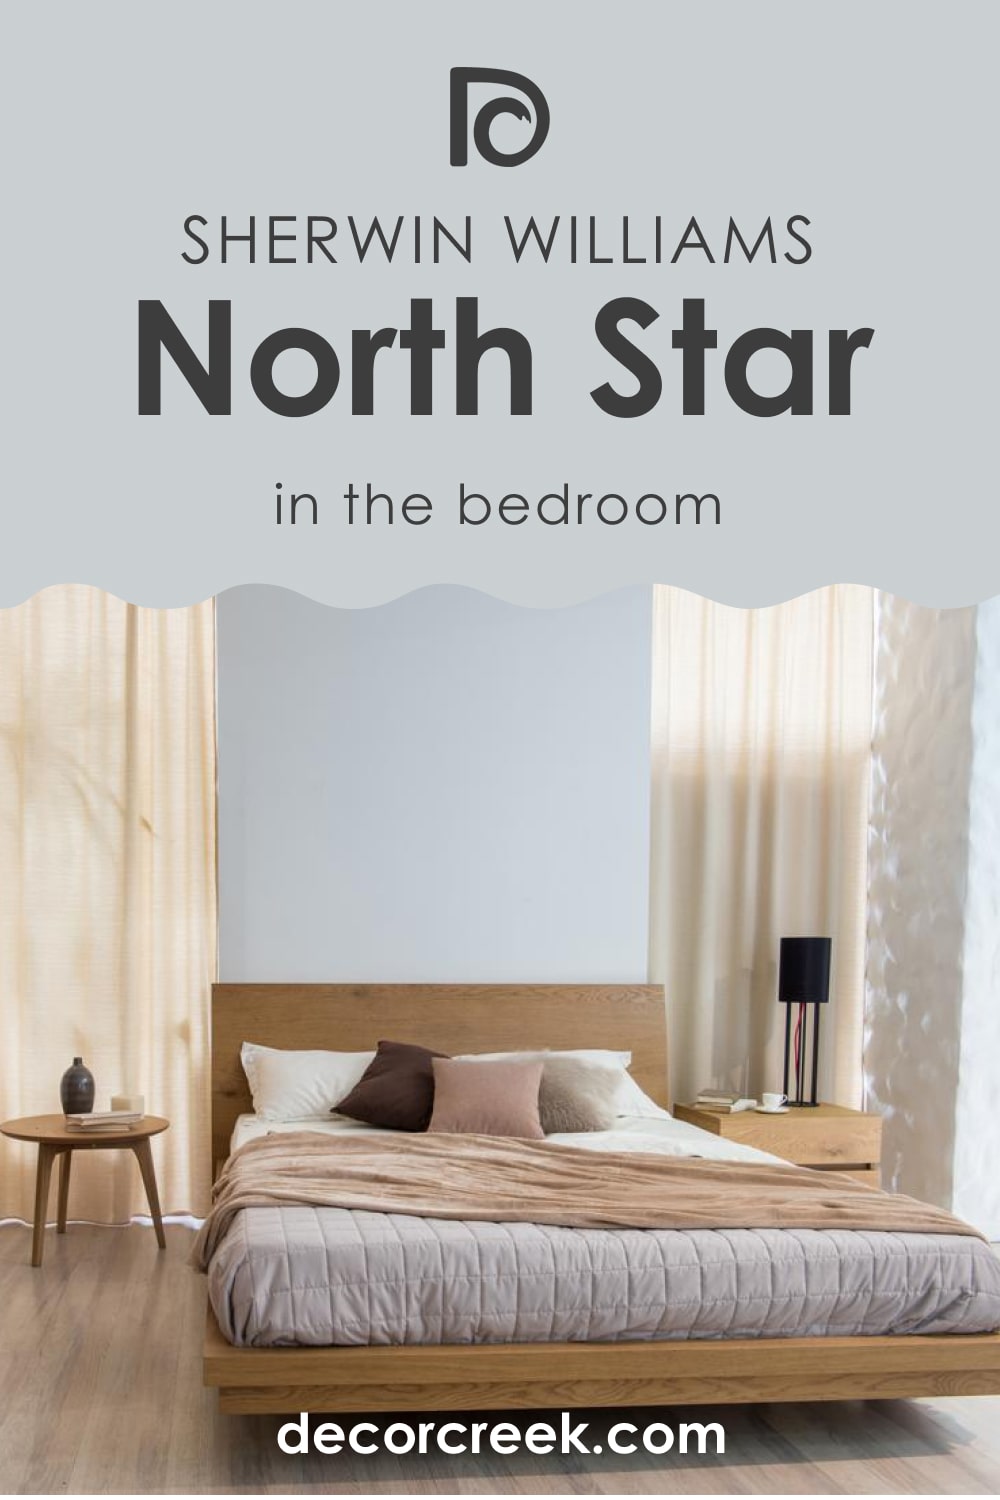 North Star SW-6246 in a Bedroom